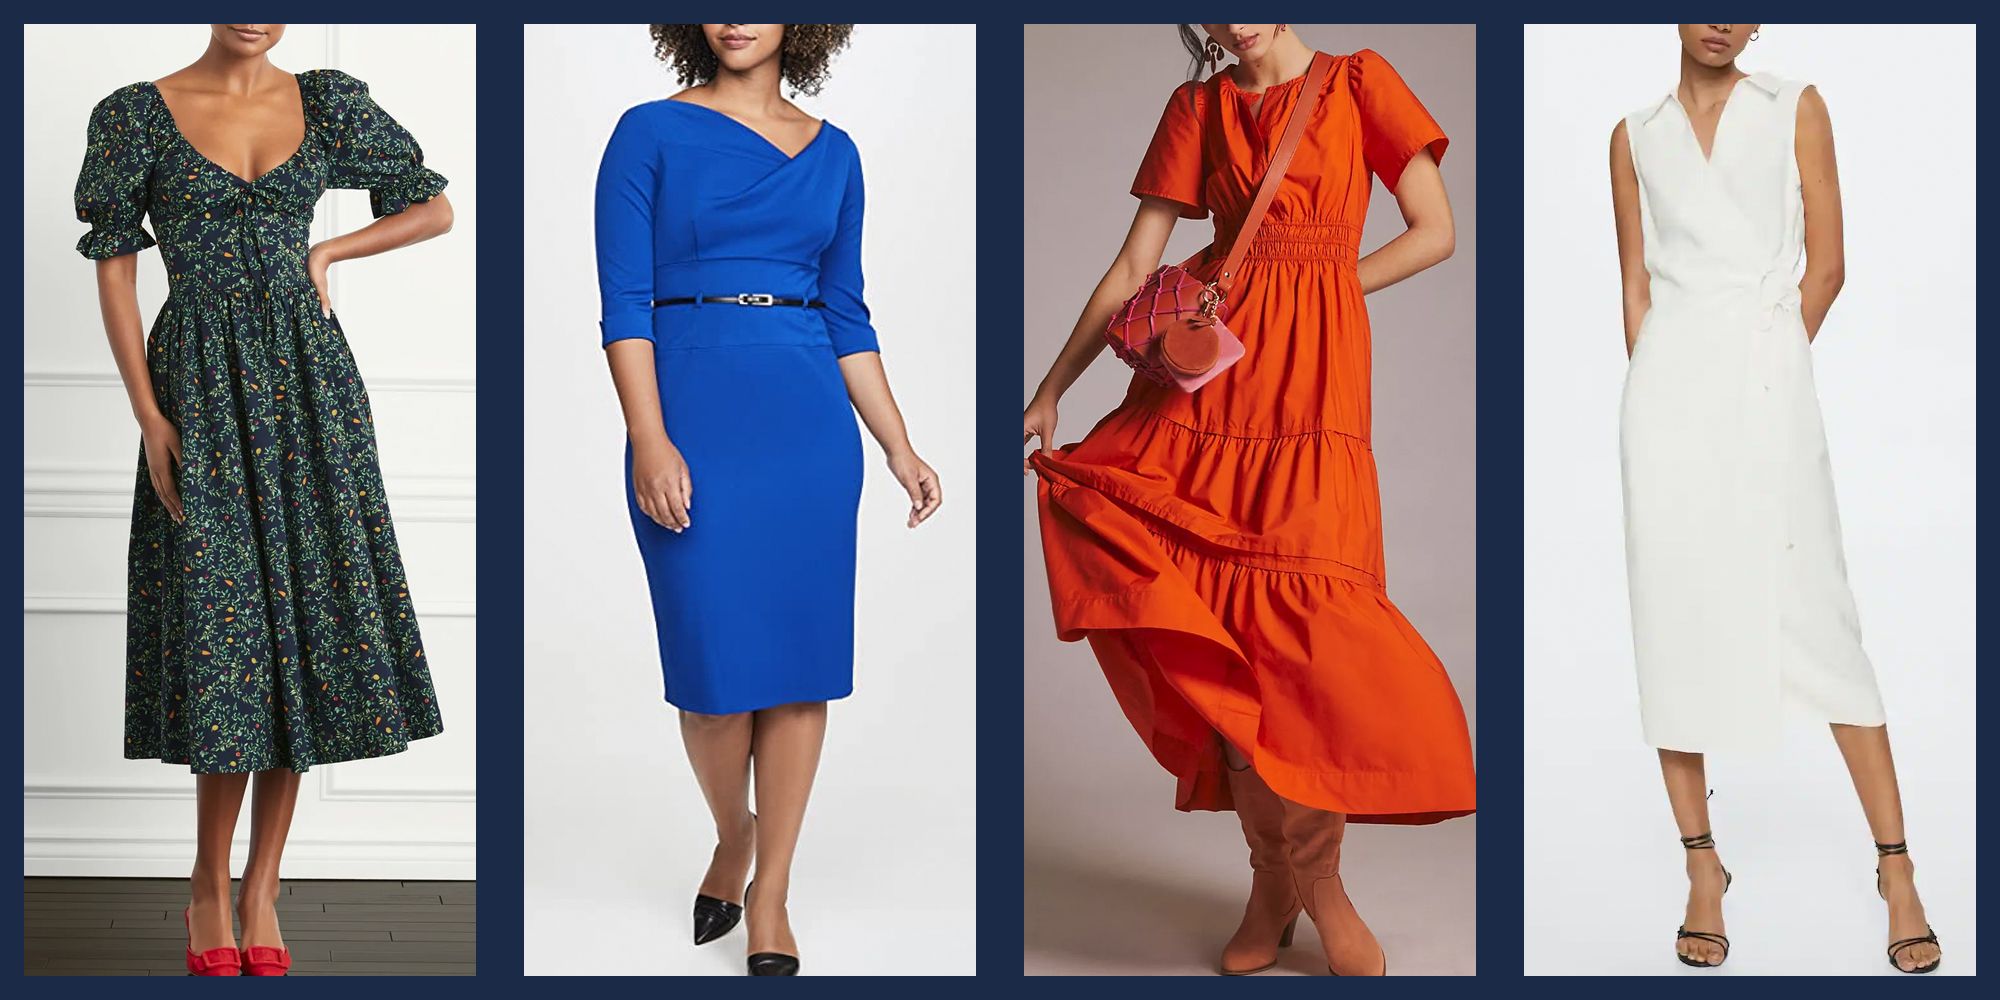 Sophisticated Modest Dresses for Every Occasion